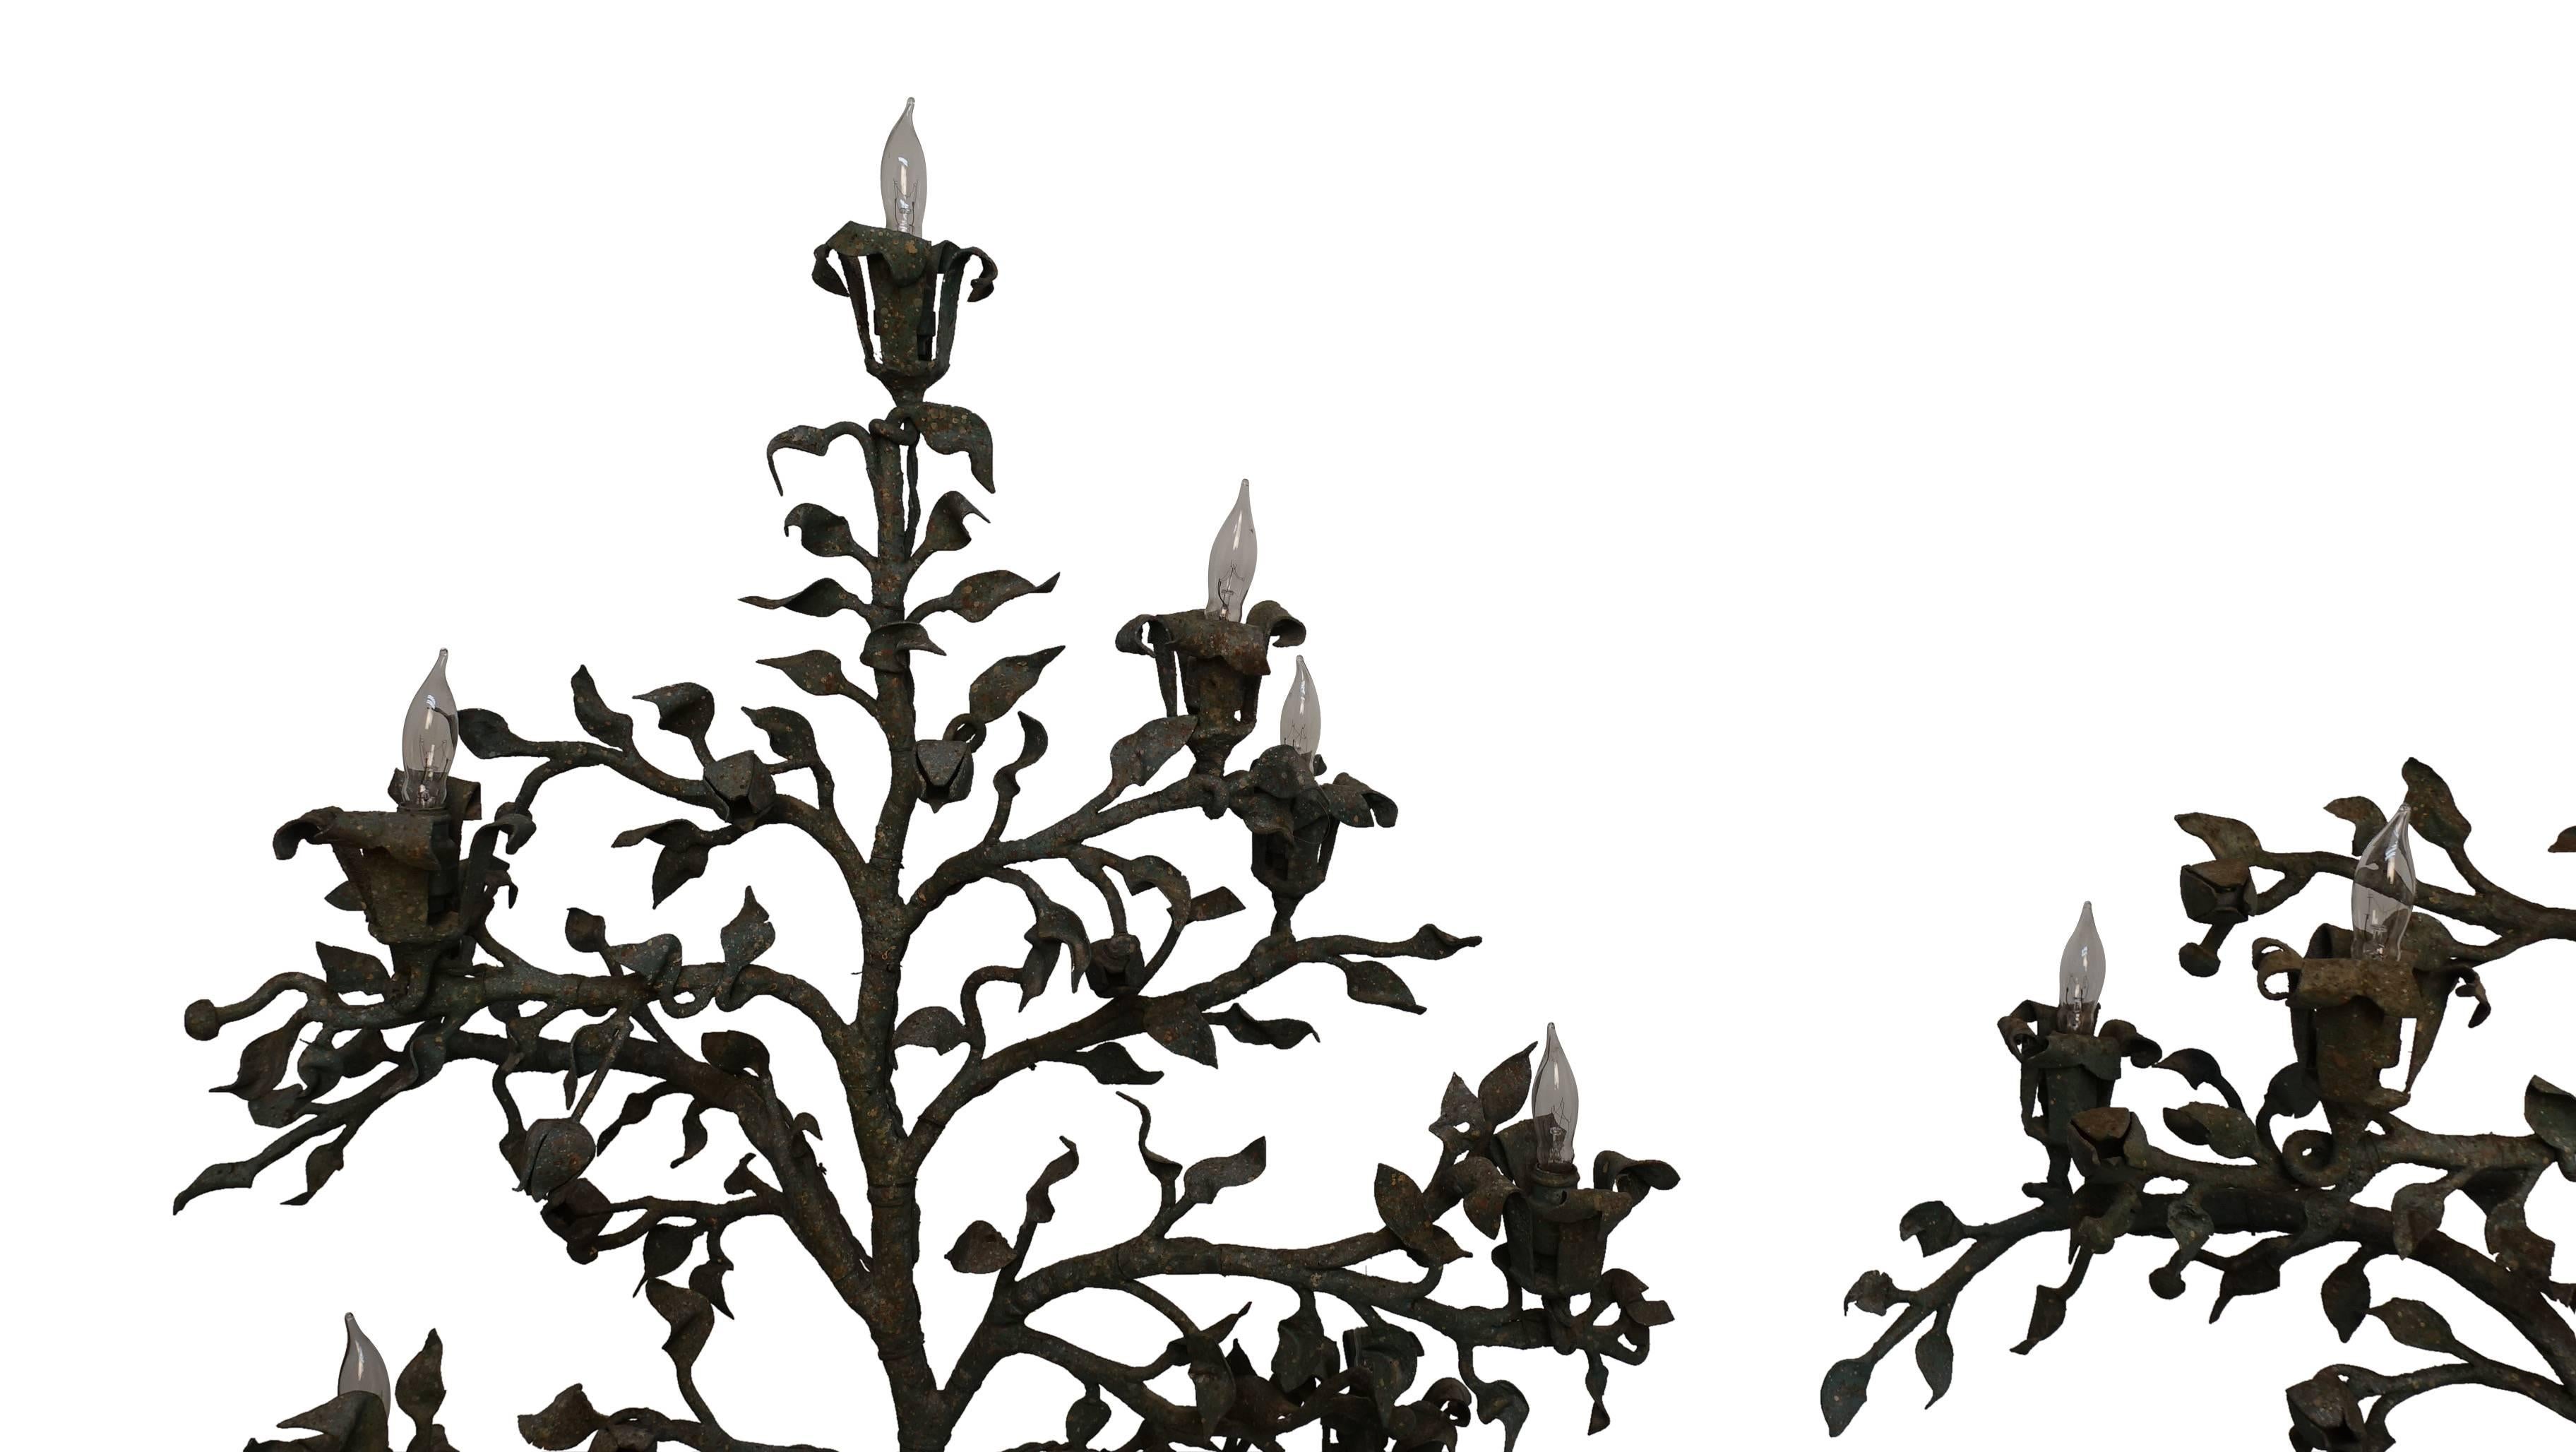 Pair of Wrought Iron Tree Form Torchiere Floor Lamps, Italy, 19th Century 8